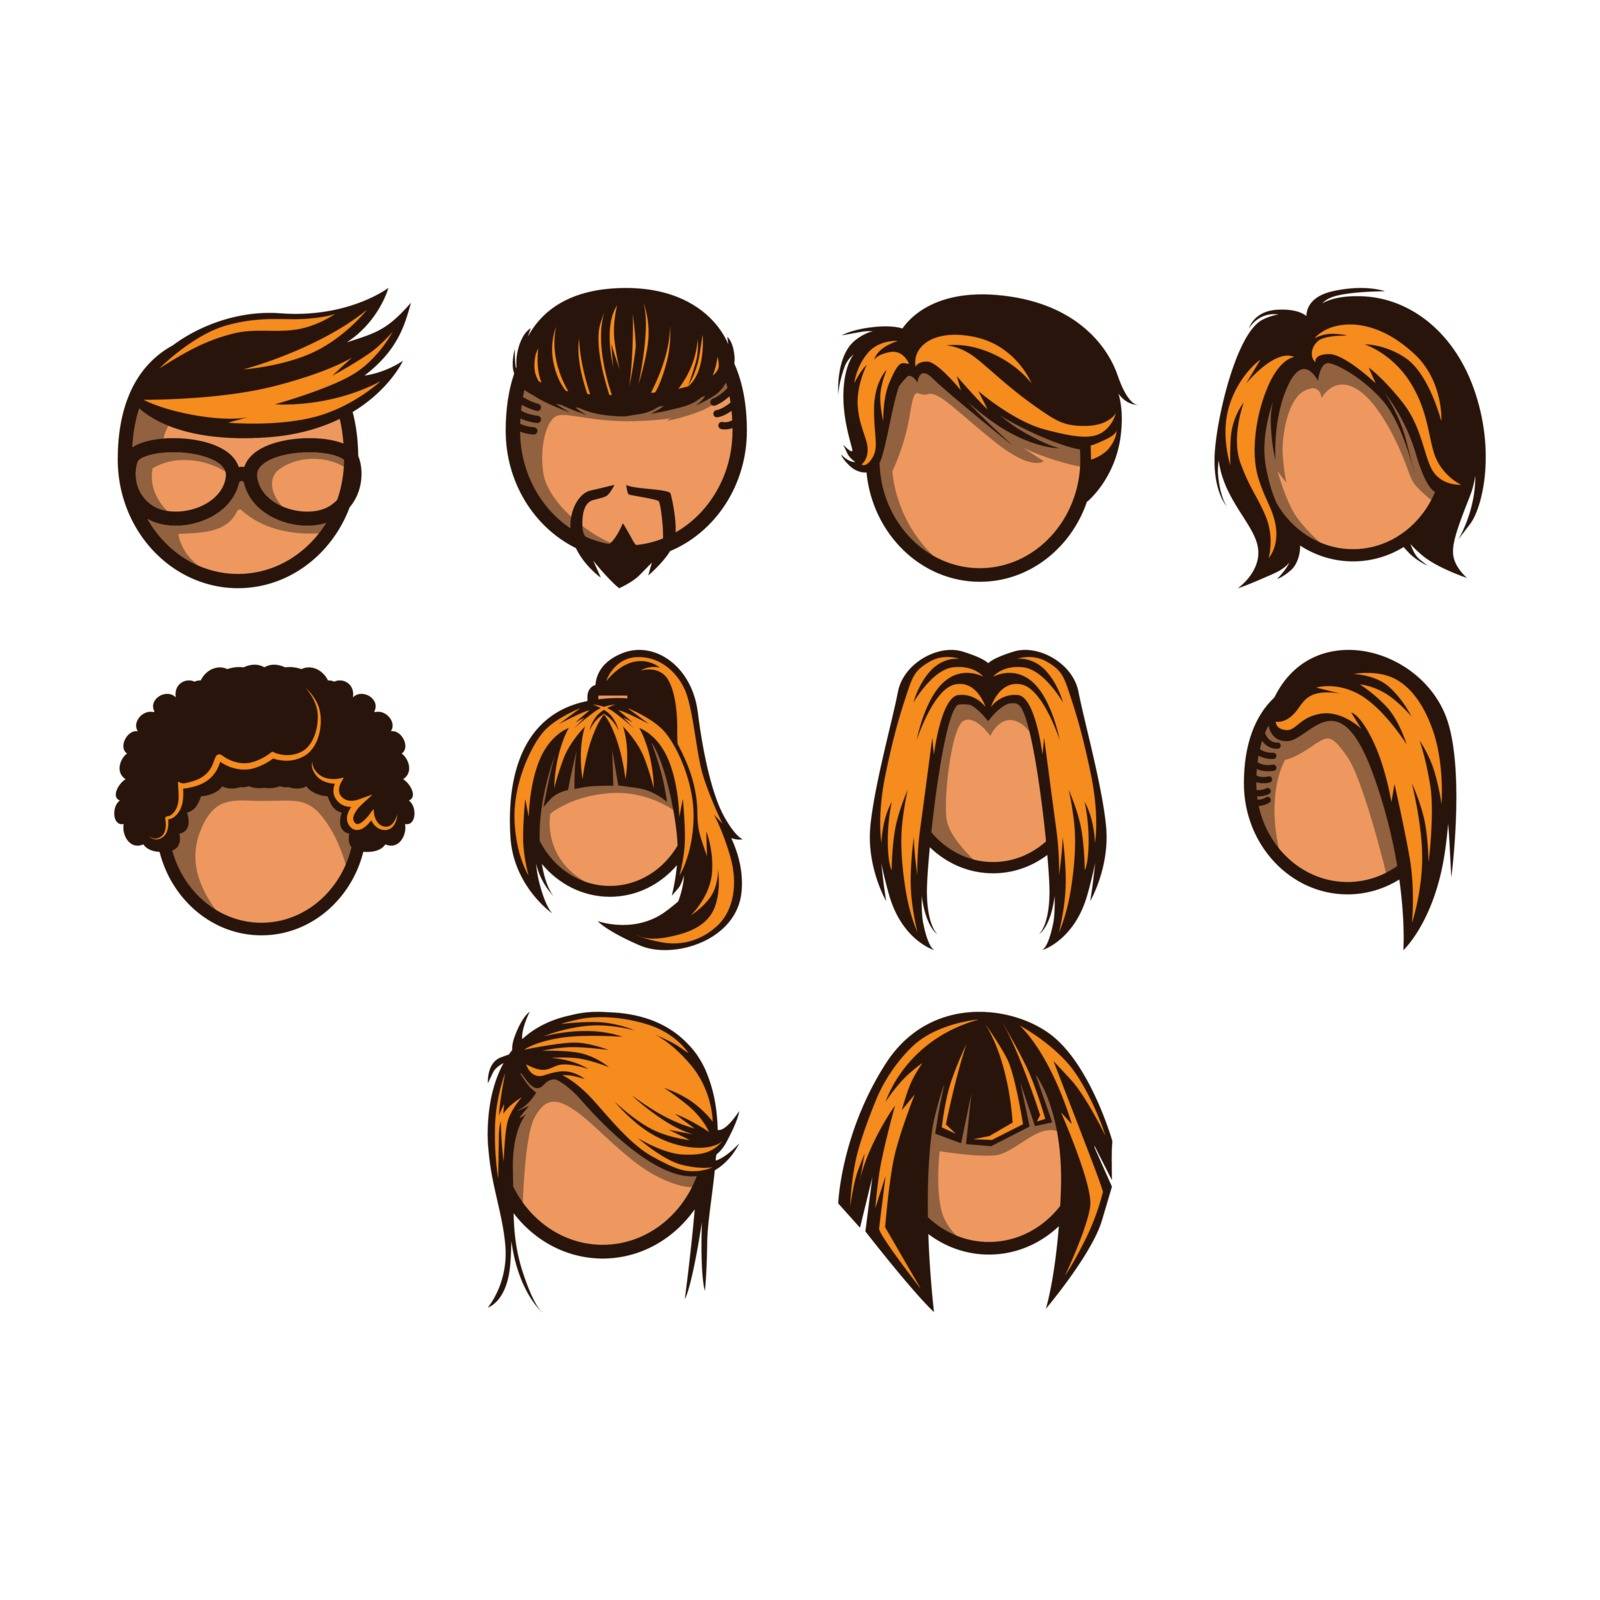 Hairstyle icon set by ang_bay